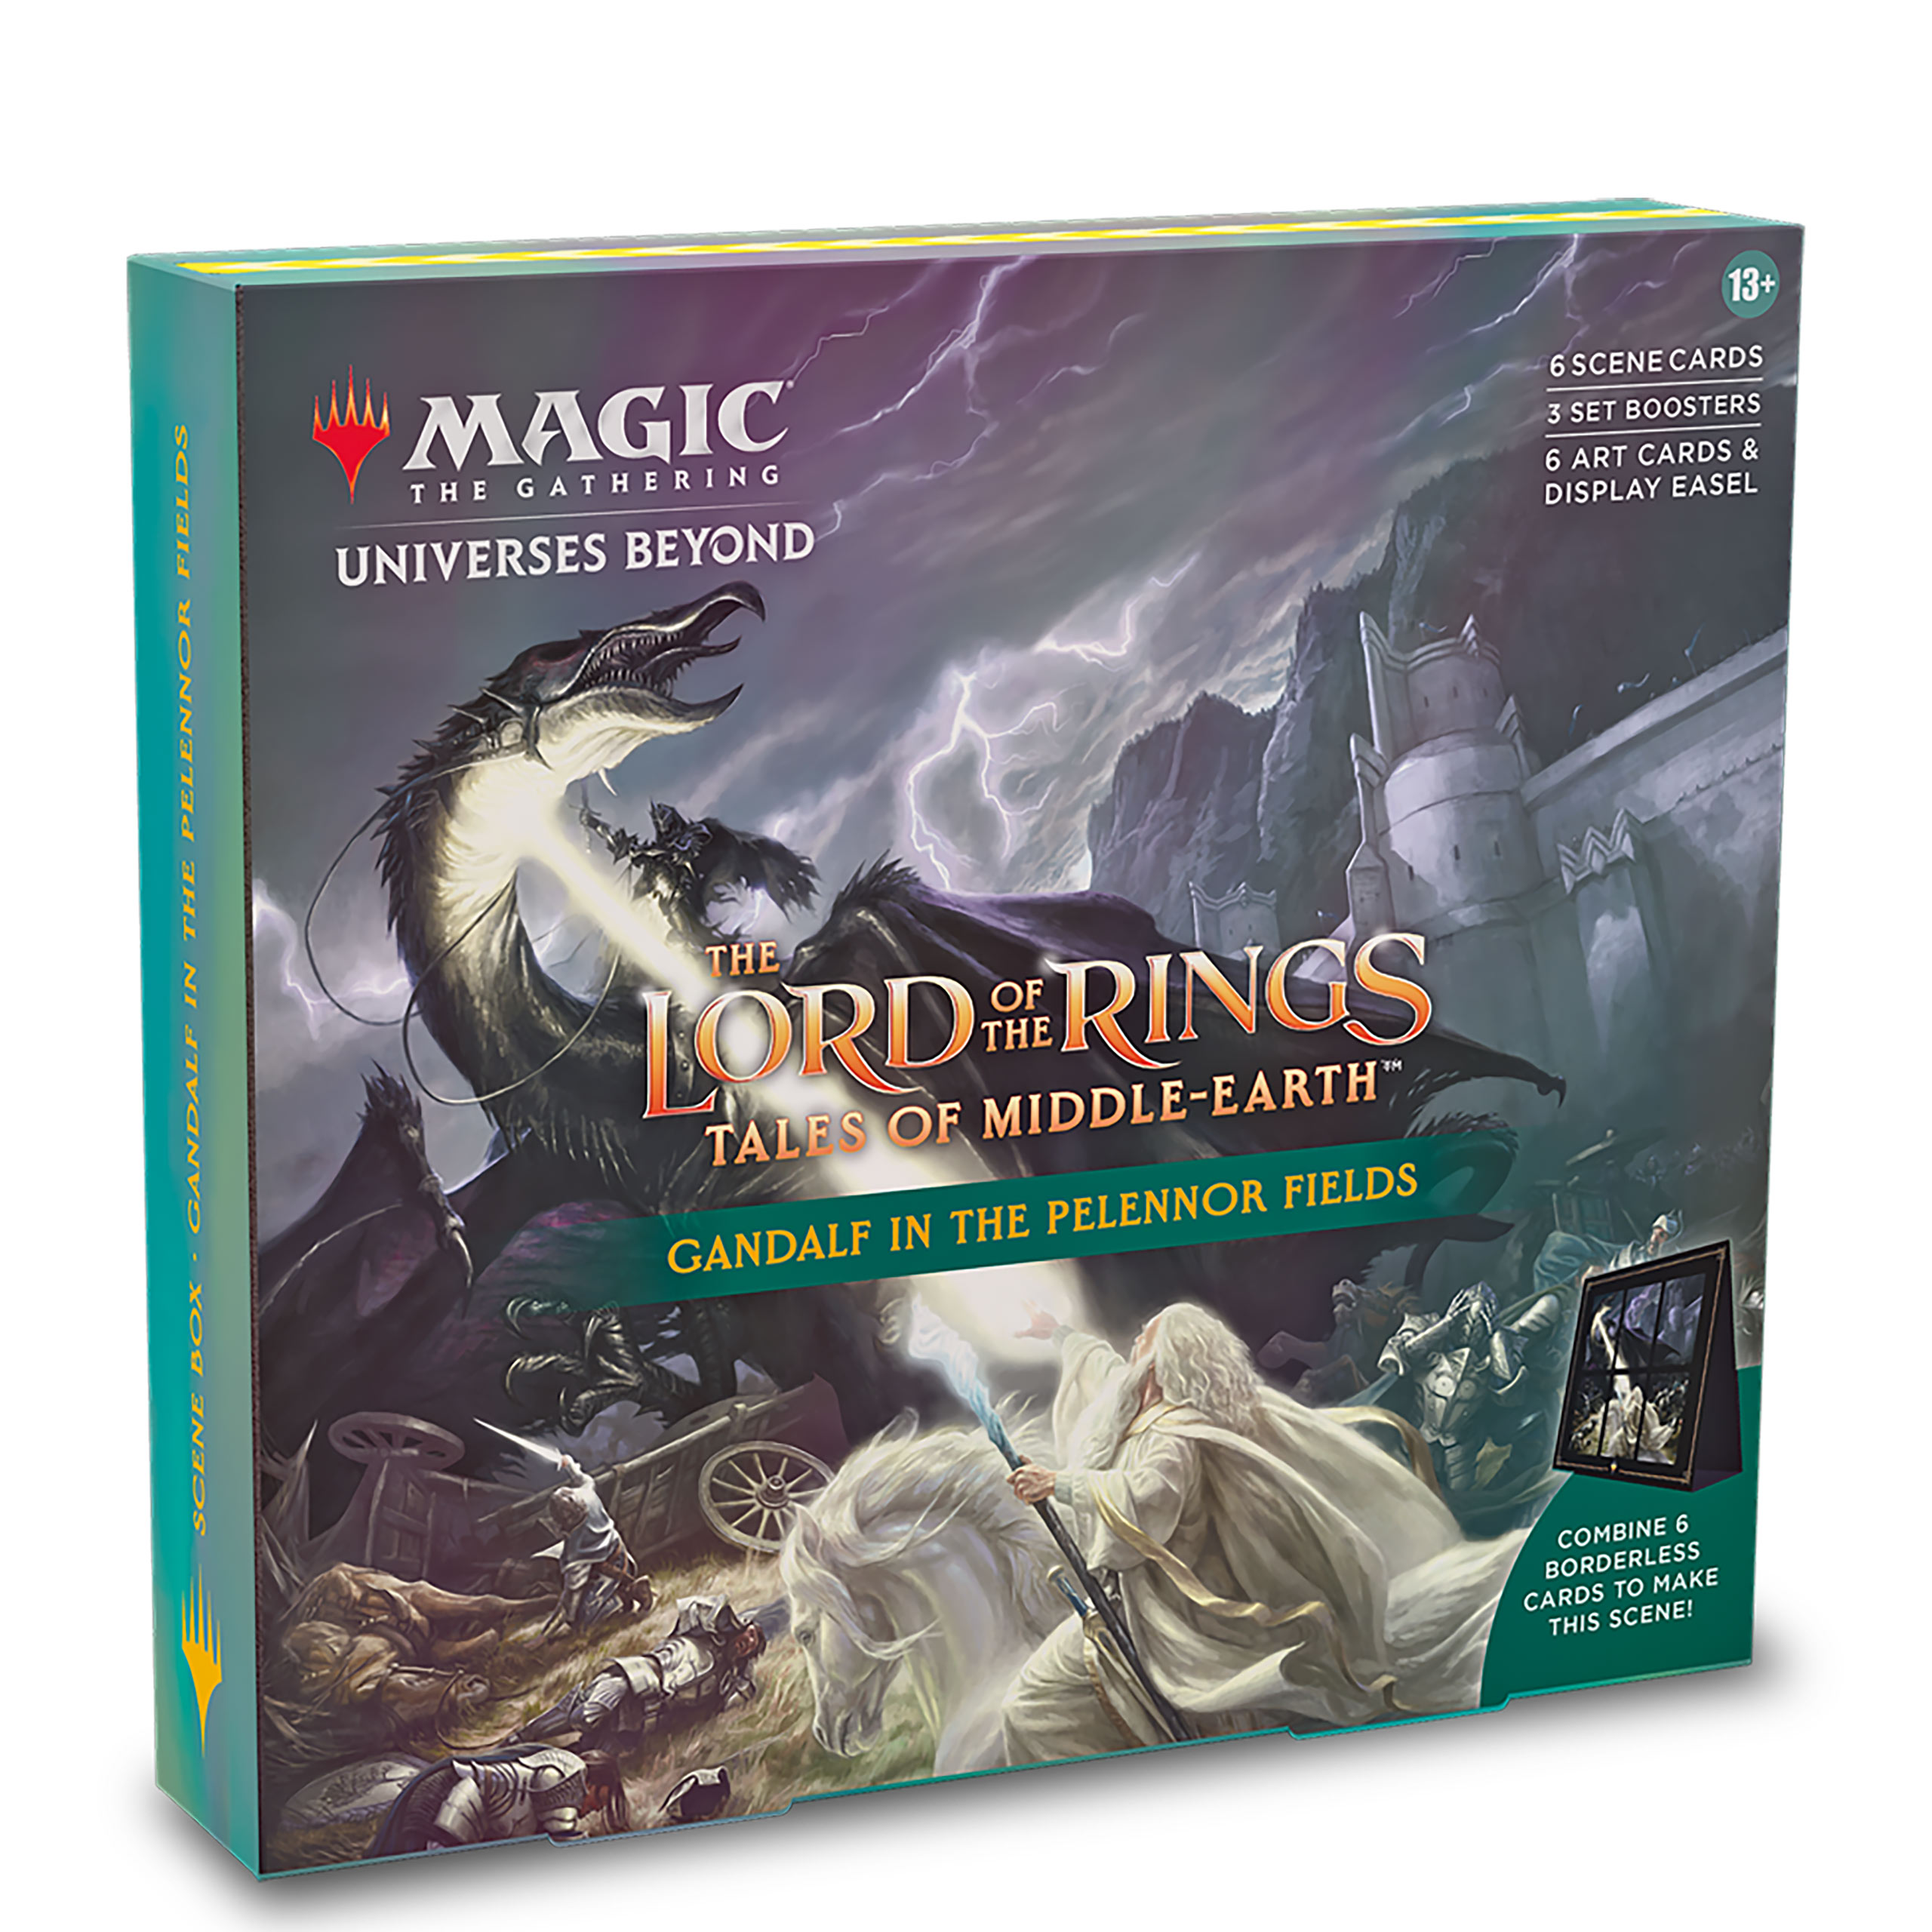 Herr der Ringe Tales of Middle-Earth - Gandalf In The Pelennor Fields Character Box - Magic The Gathering